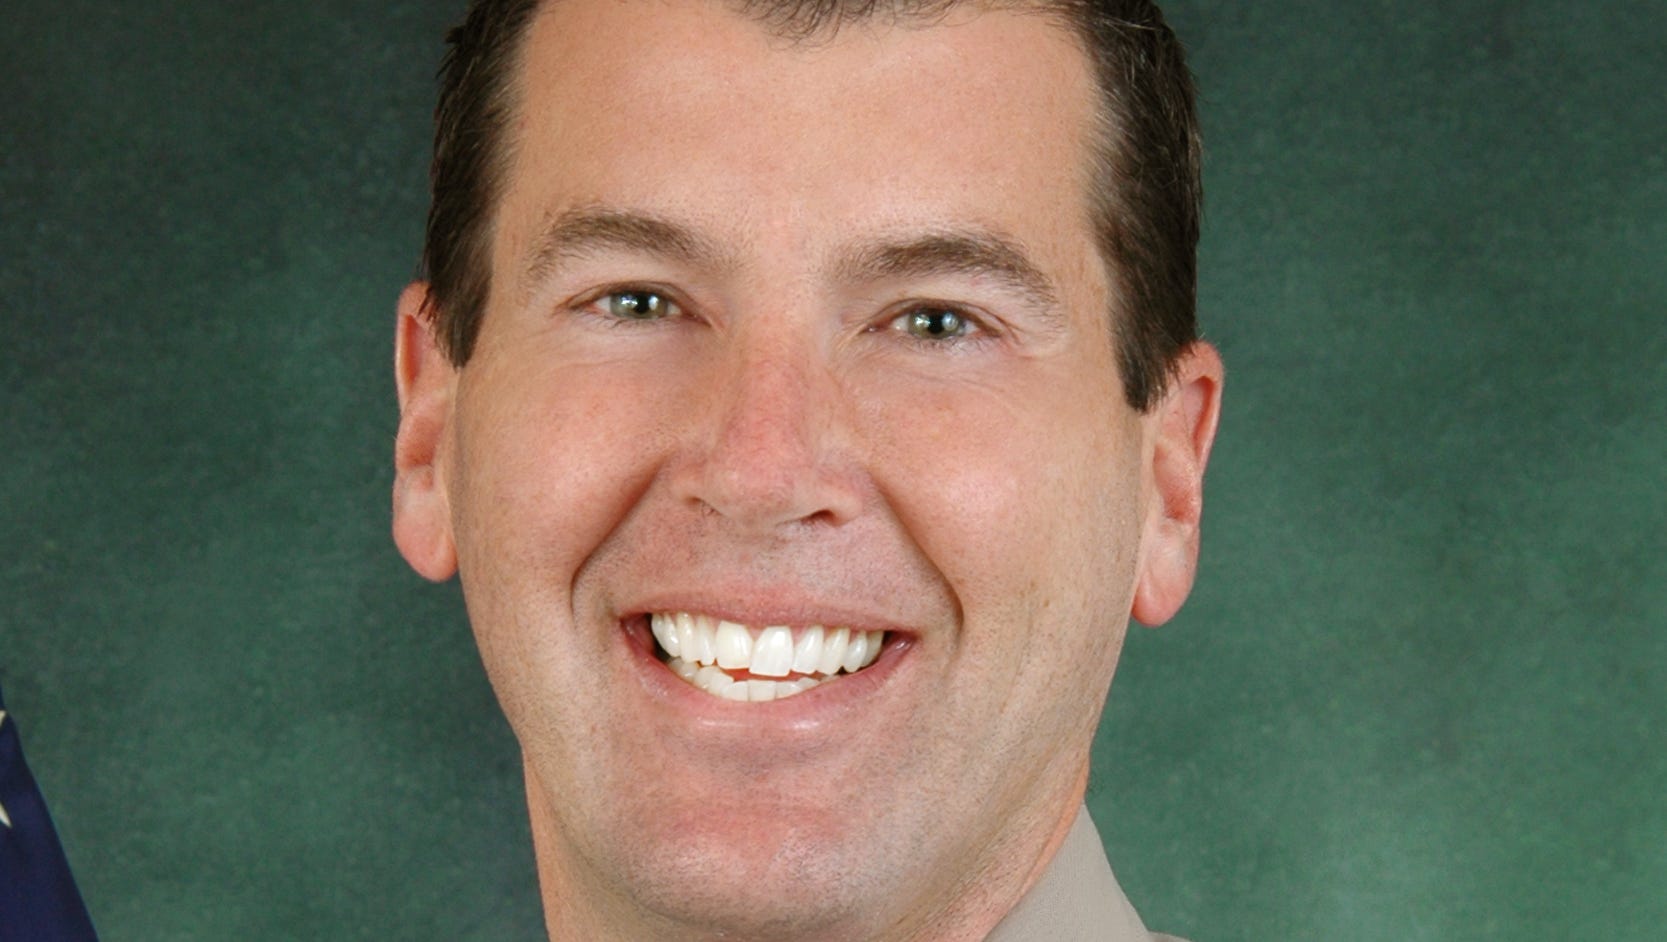 Capt. James Fryhoff selected as next Thousand Oaks chief of police